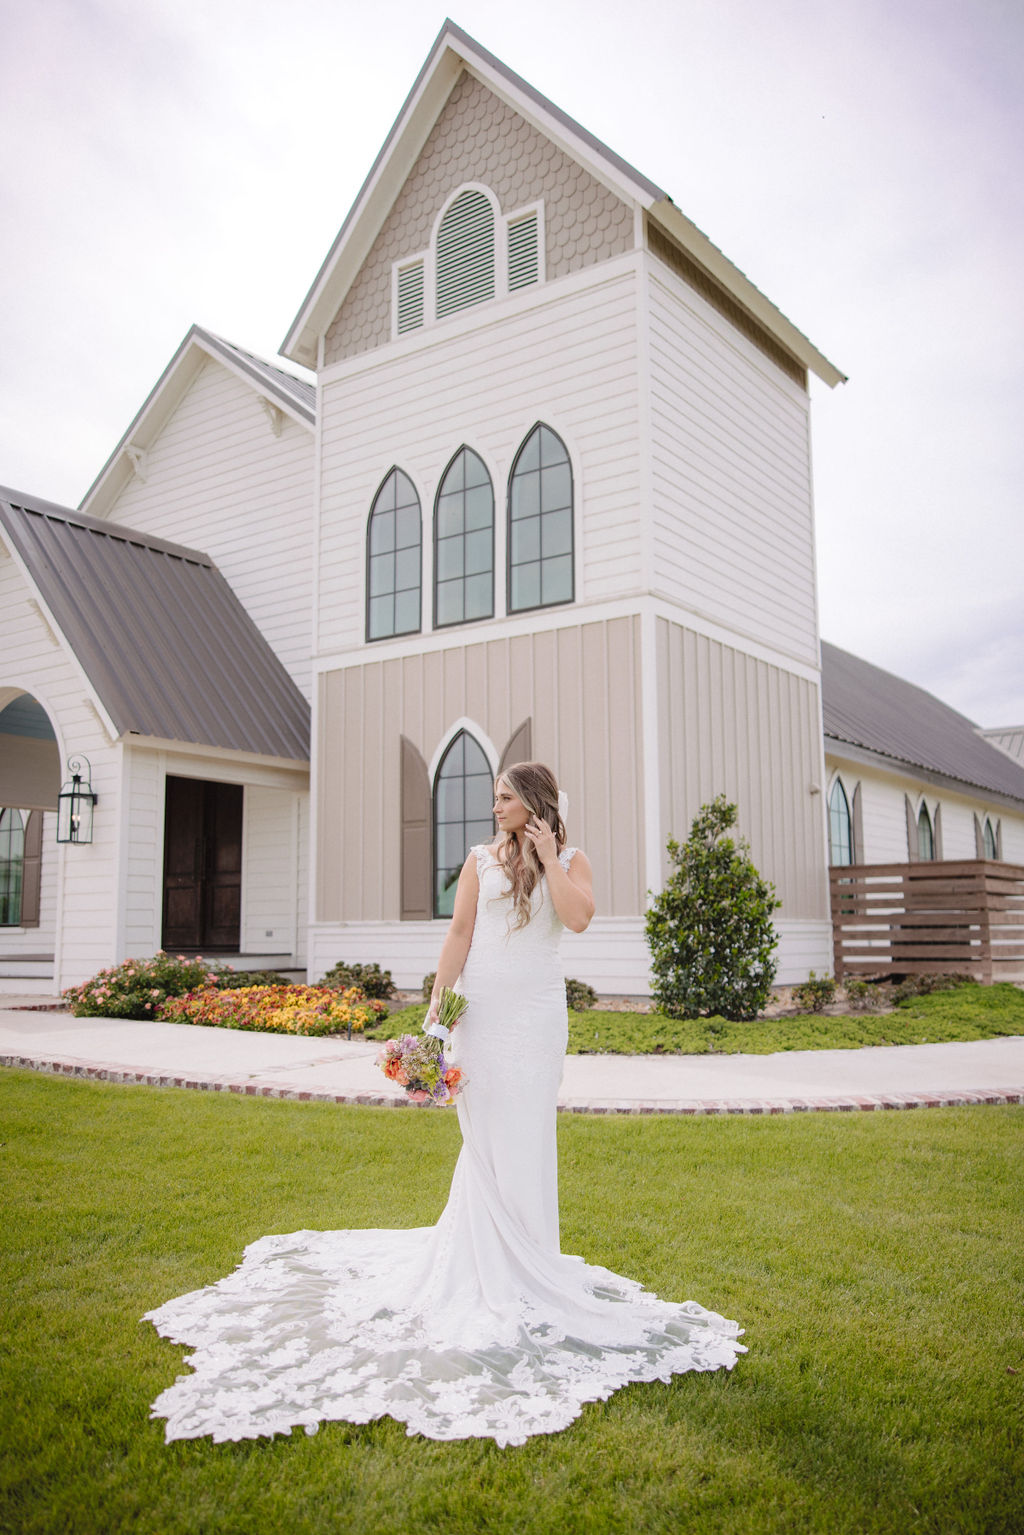 A bride in a white wedding dress holding a bouquet stands on a lawn in front of a tall, white, church-like building with pointed arched windows at deep in the heart farms